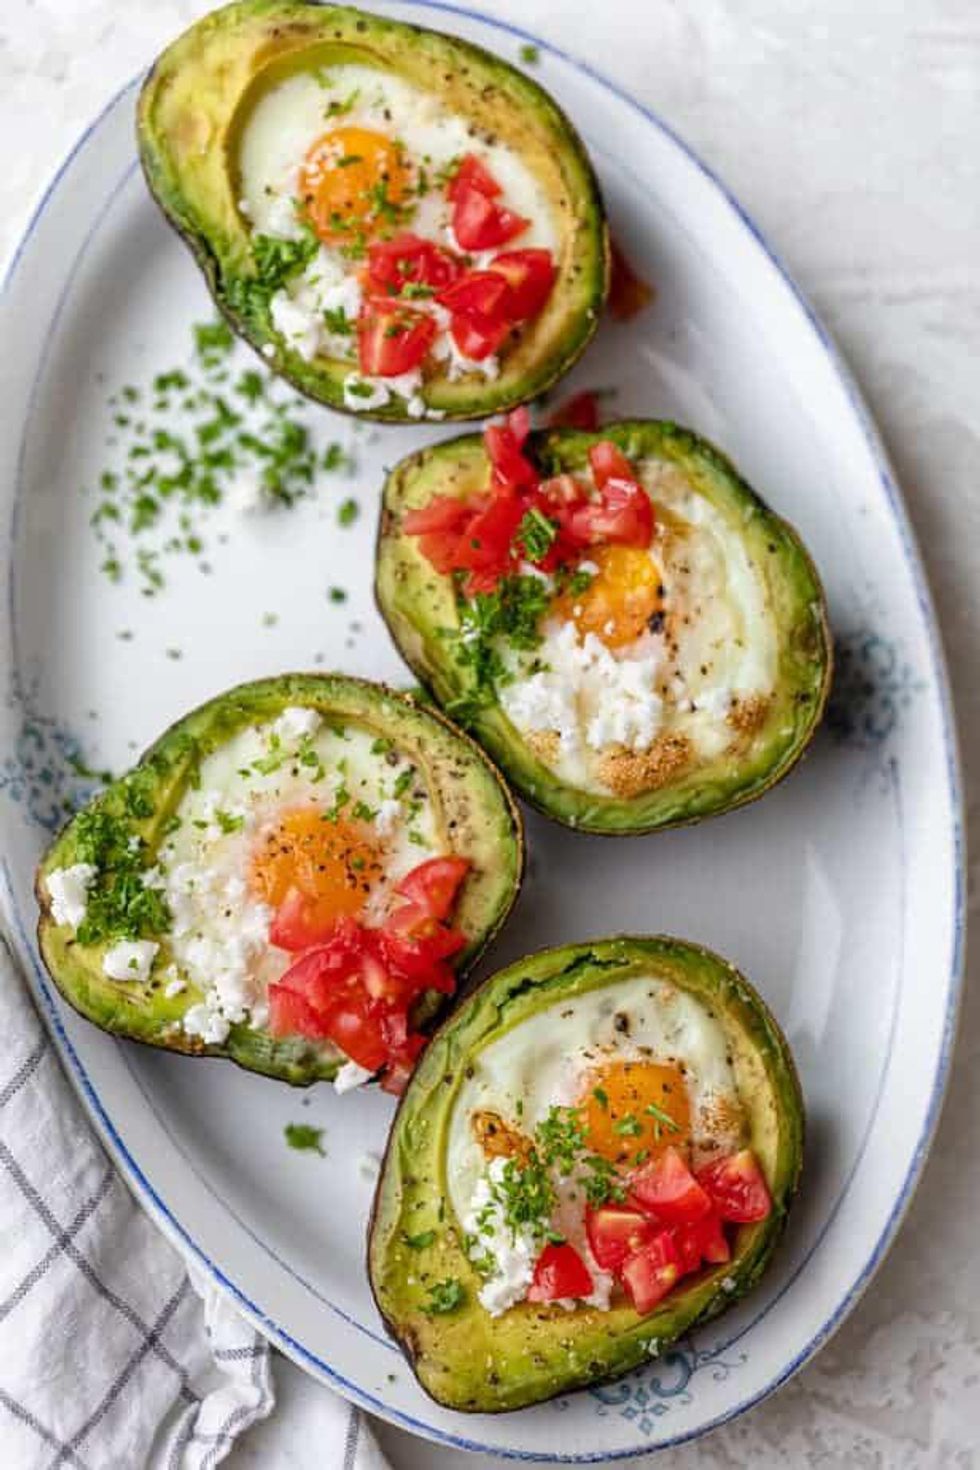 15 Gluten-Free and Paleo Easter Brunch Ideas - Brit + Co